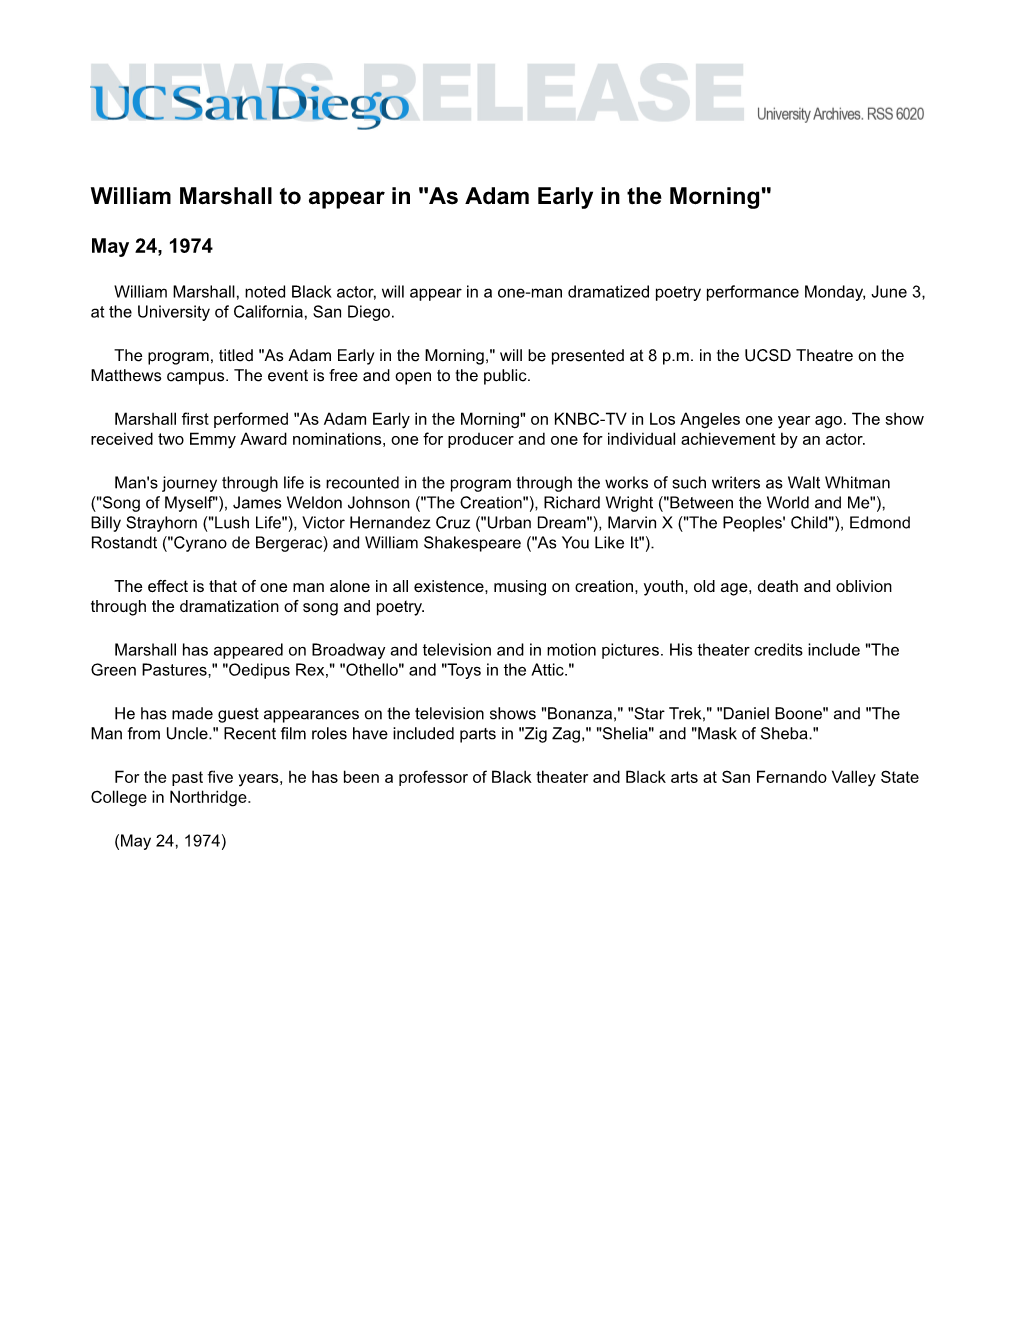 William Marshall to Appear in "As Adam Early in the Morning"